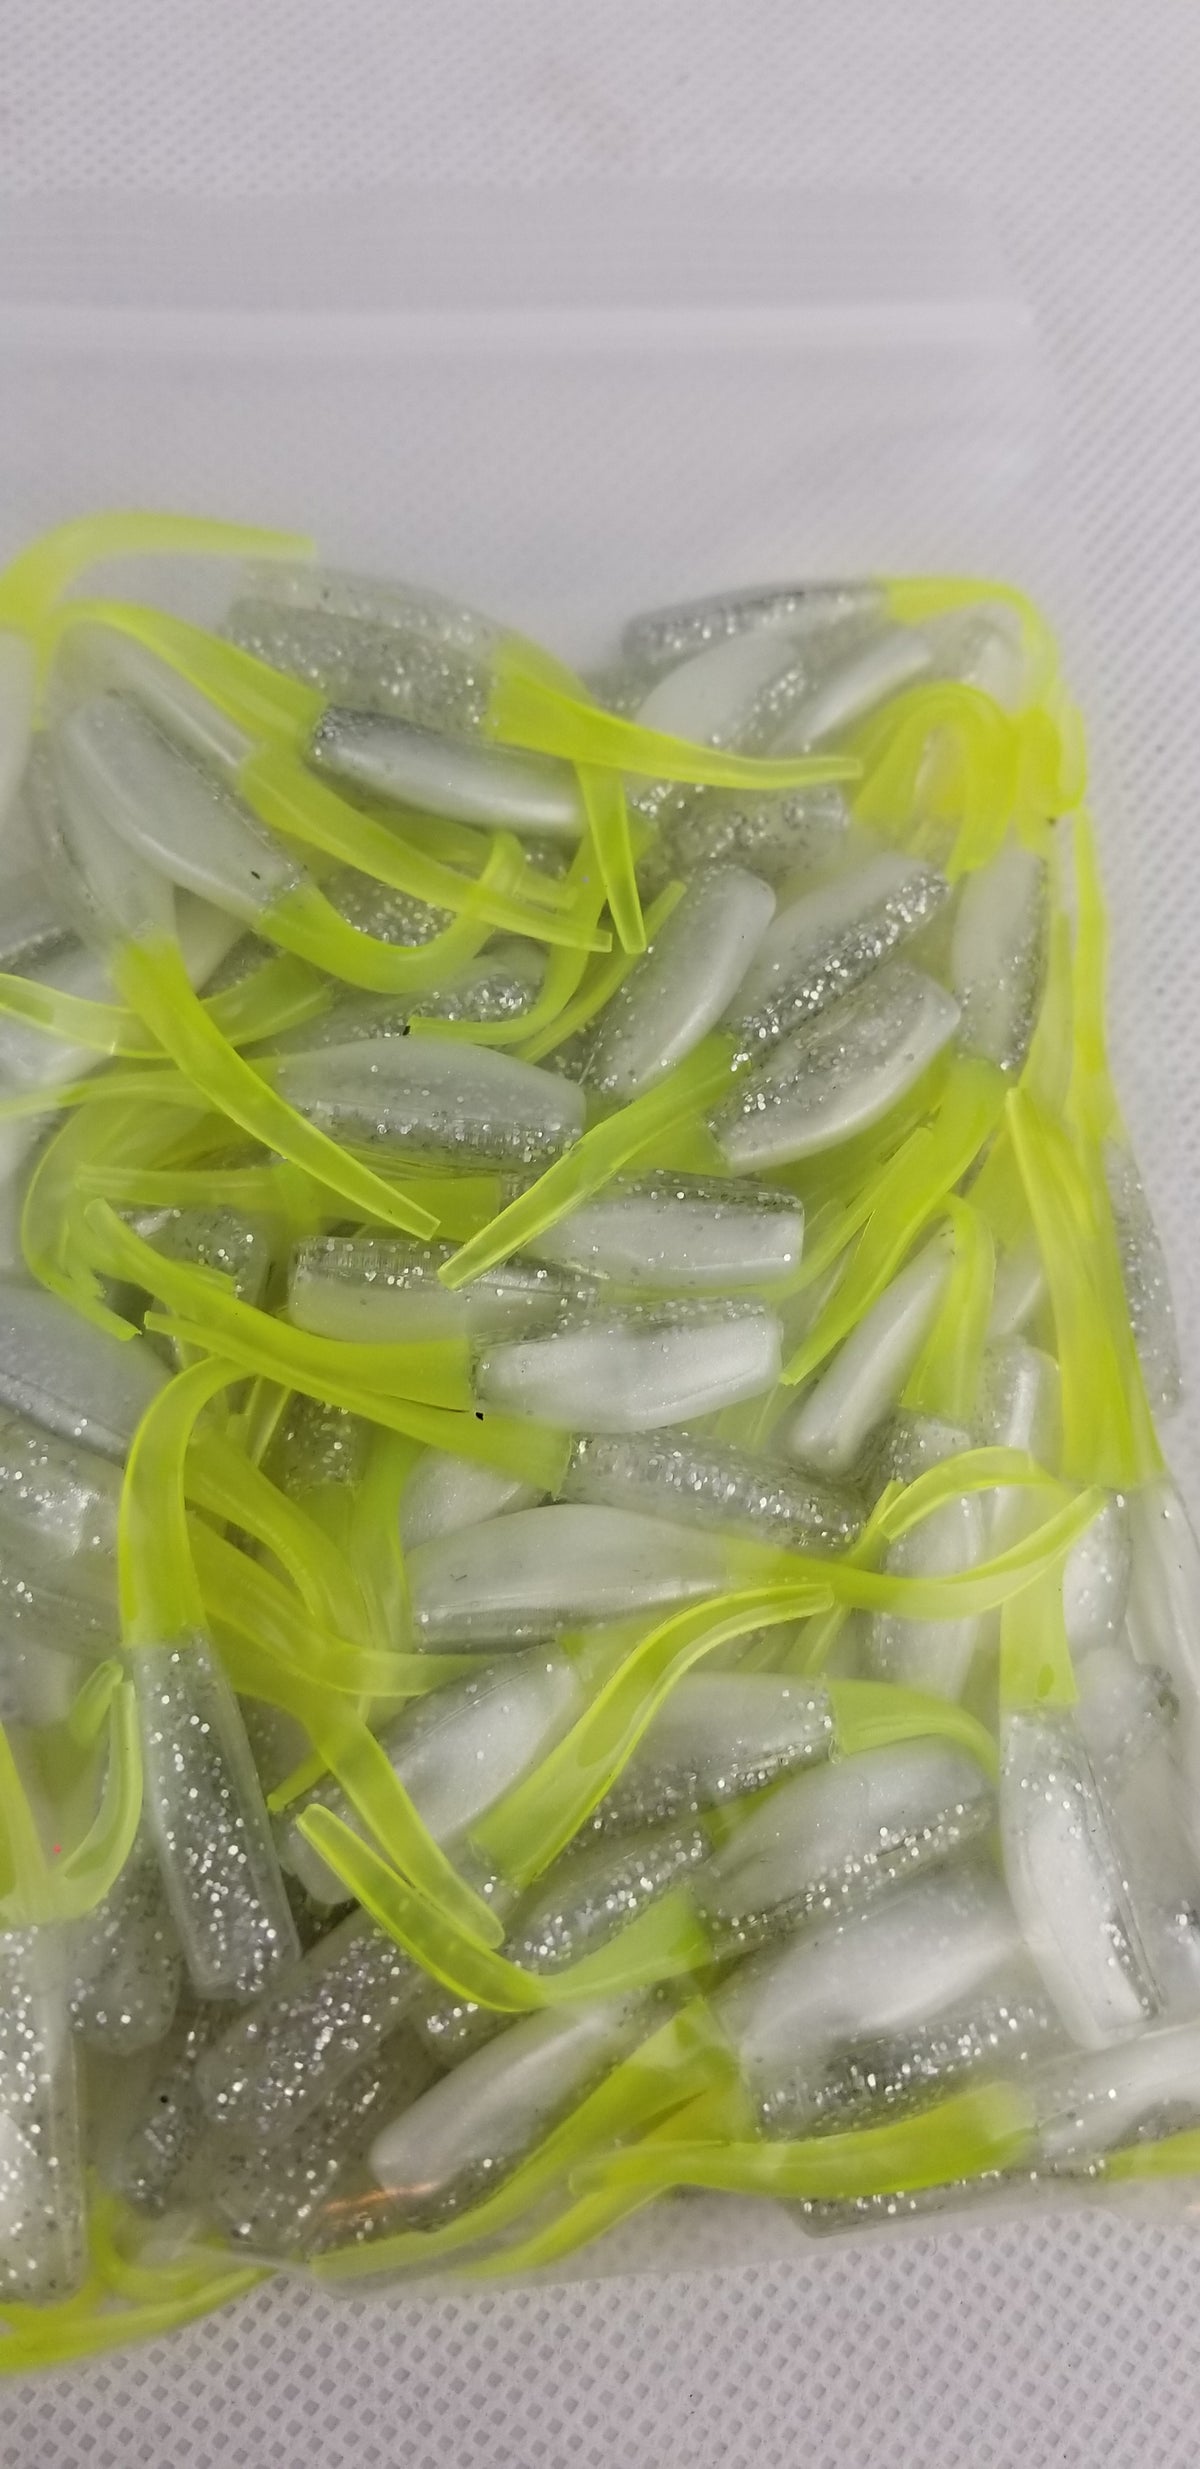 Cam's 2"(HOLOGRAM FLAKE)  Stinger Shad 100pc The White Knight Crappie Soft Jigs [A Cam's Exclusive]